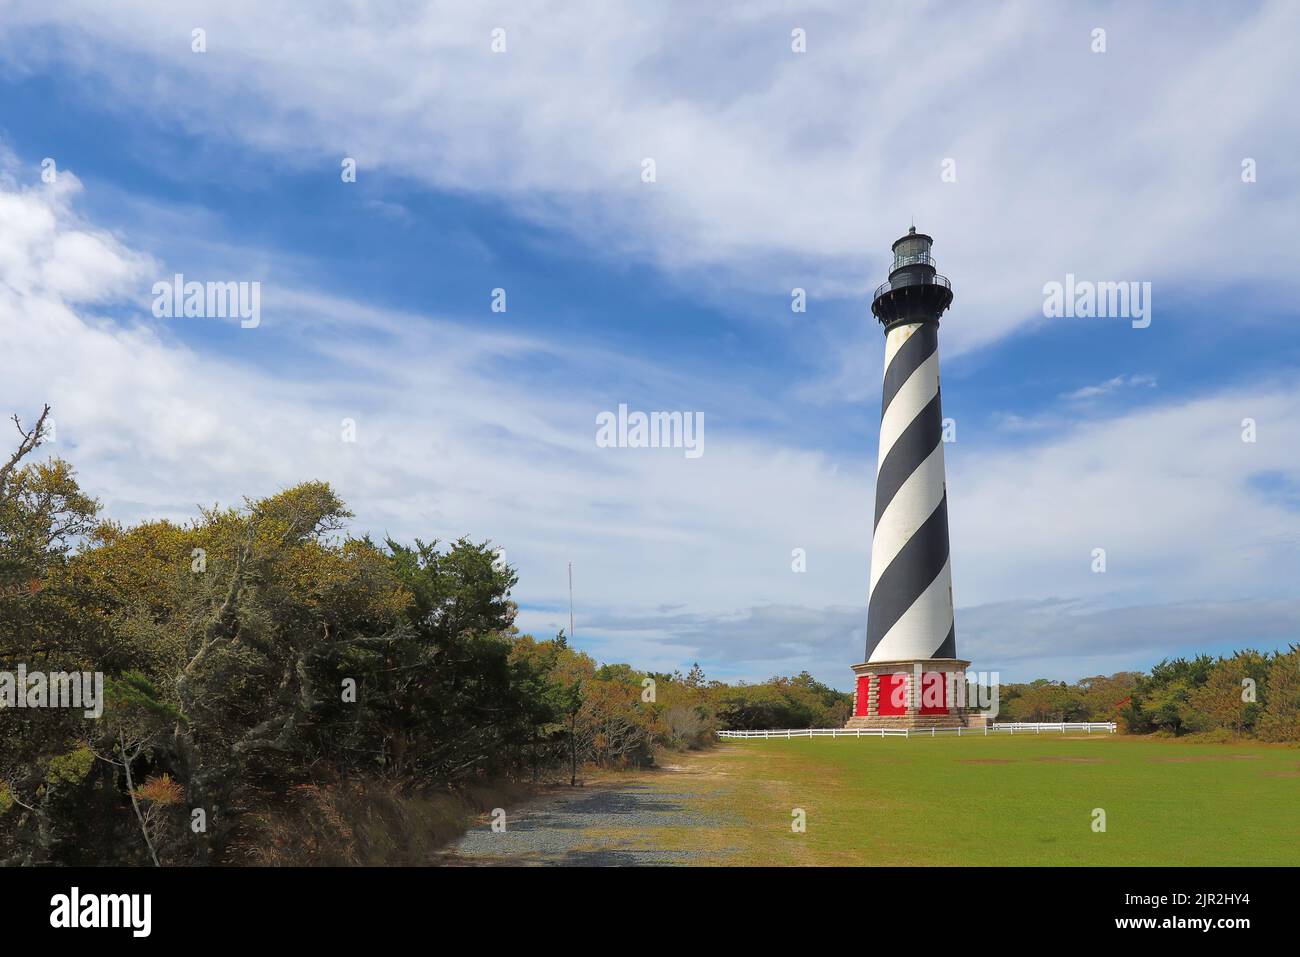 The Cape Hatteras lighthouse tower near the town of Buxton on the Outer Banks of North Carolina Stock Photo